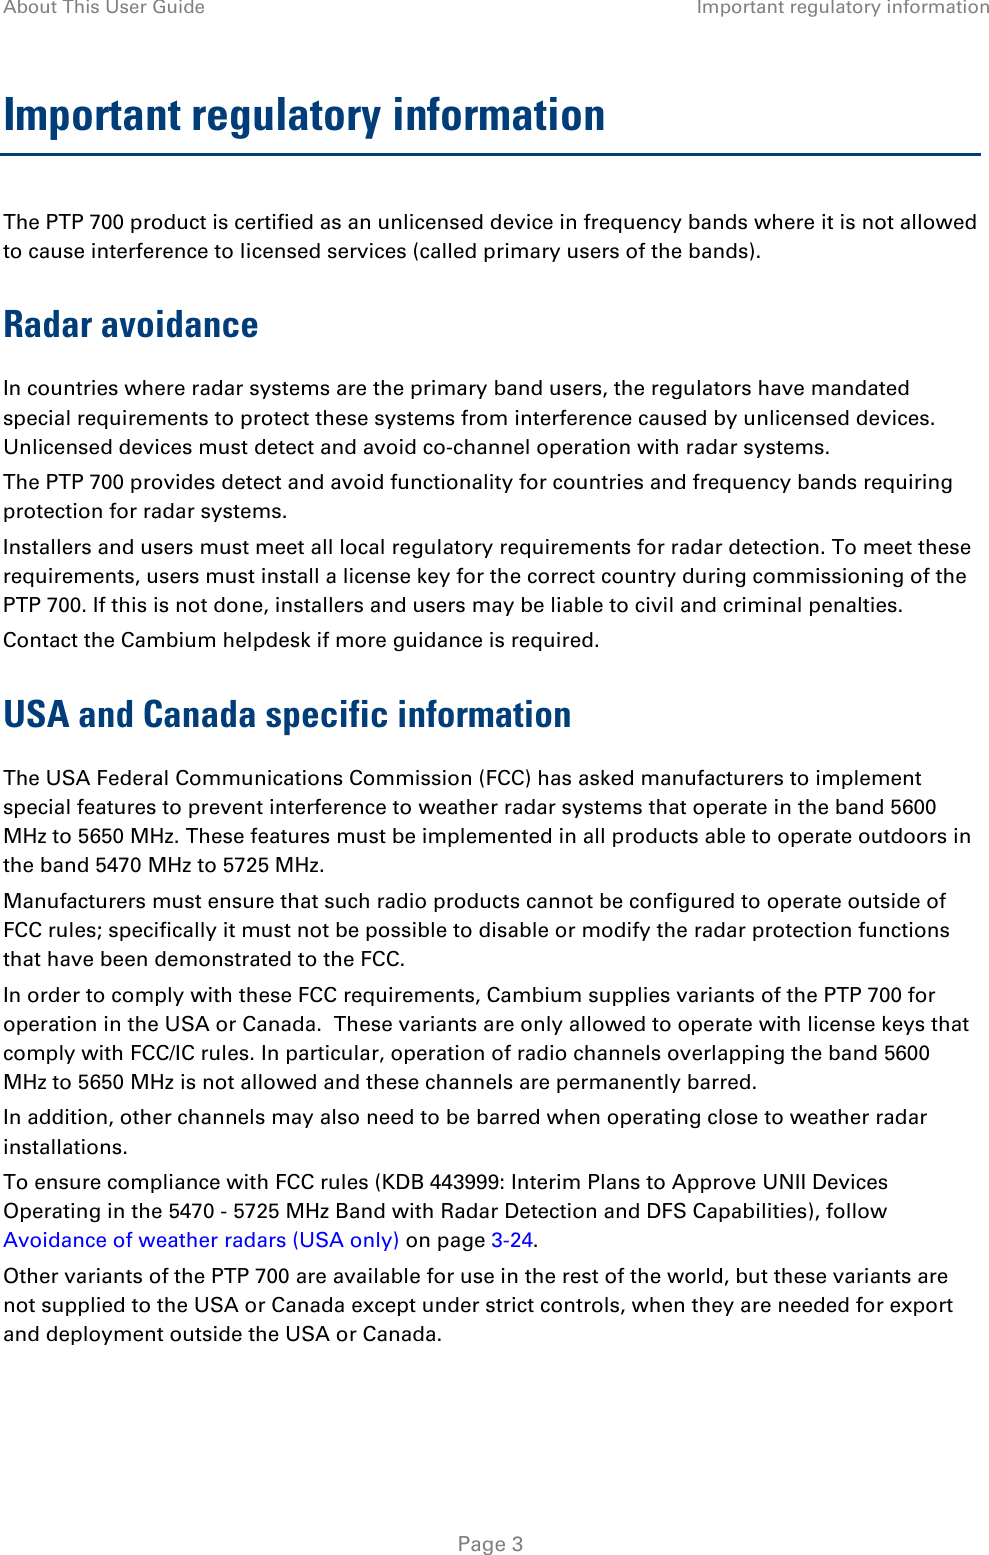 About This User Guide Important regulatory information  Important regulatory information The PTP 700 product is certified as an unlicensed device in frequency bands where it is not allowed to cause interference to licensed services (called primary users of the bands). Radar avoidance In countries where radar systems are the primary band users, the regulators have mandated special requirements to protect these systems from interference caused by unlicensed devices.  Unlicensed devices must detect and avoid co-channel operation with radar systems.  The PTP 700 provides detect and avoid functionality for countries and frequency bands requiring protection for radar systems. Installers and users must meet all local regulatory requirements for radar detection. To meet these requirements, users must install a license key for the correct country during commissioning of the PTP 700. If this is not done, installers and users may be liable to civil and criminal penalties. Contact the Cambium helpdesk if more guidance is required. USA and Canada specific information The USA Federal Communications Commission (FCC) has asked manufacturers to implement special features to prevent interference to weather radar systems that operate in the band 5600 MHz to 5650 MHz. These features must be implemented in all products able to operate outdoors in the band 5470 MHz to 5725 MHz. Manufacturers must ensure that such radio products cannot be configured to operate outside of FCC rules; specifically it must not be possible to disable or modify the radar protection functions that have been demonstrated to the FCC. In order to comply with these FCC requirements, Cambium supplies variants of the PTP 700 for operation in the USA or Canada.  These variants are only allowed to operate with license keys that comply with FCC/IC rules. In particular, operation of radio channels overlapping the band 5600 MHz to 5650 MHz is not allowed and these channels are permanently barred. In addition, other channels may also need to be barred when operating close to weather radar installations. To ensure compliance with FCC rules (KDB 443999: Interim Plans to Approve UNII Devices Operating in the 5470 - 5725 MHz Band with Radar Detection and DFS Capabilities), follow Avoidance of weather radars (USA only) on page 3-24. Other variants of the PTP 700 are available for use in the rest of the world, but these variants are not supplied to the USA or Canada except under strict controls, when they are needed for export and deployment outside the USA or Canada.     Page 3 